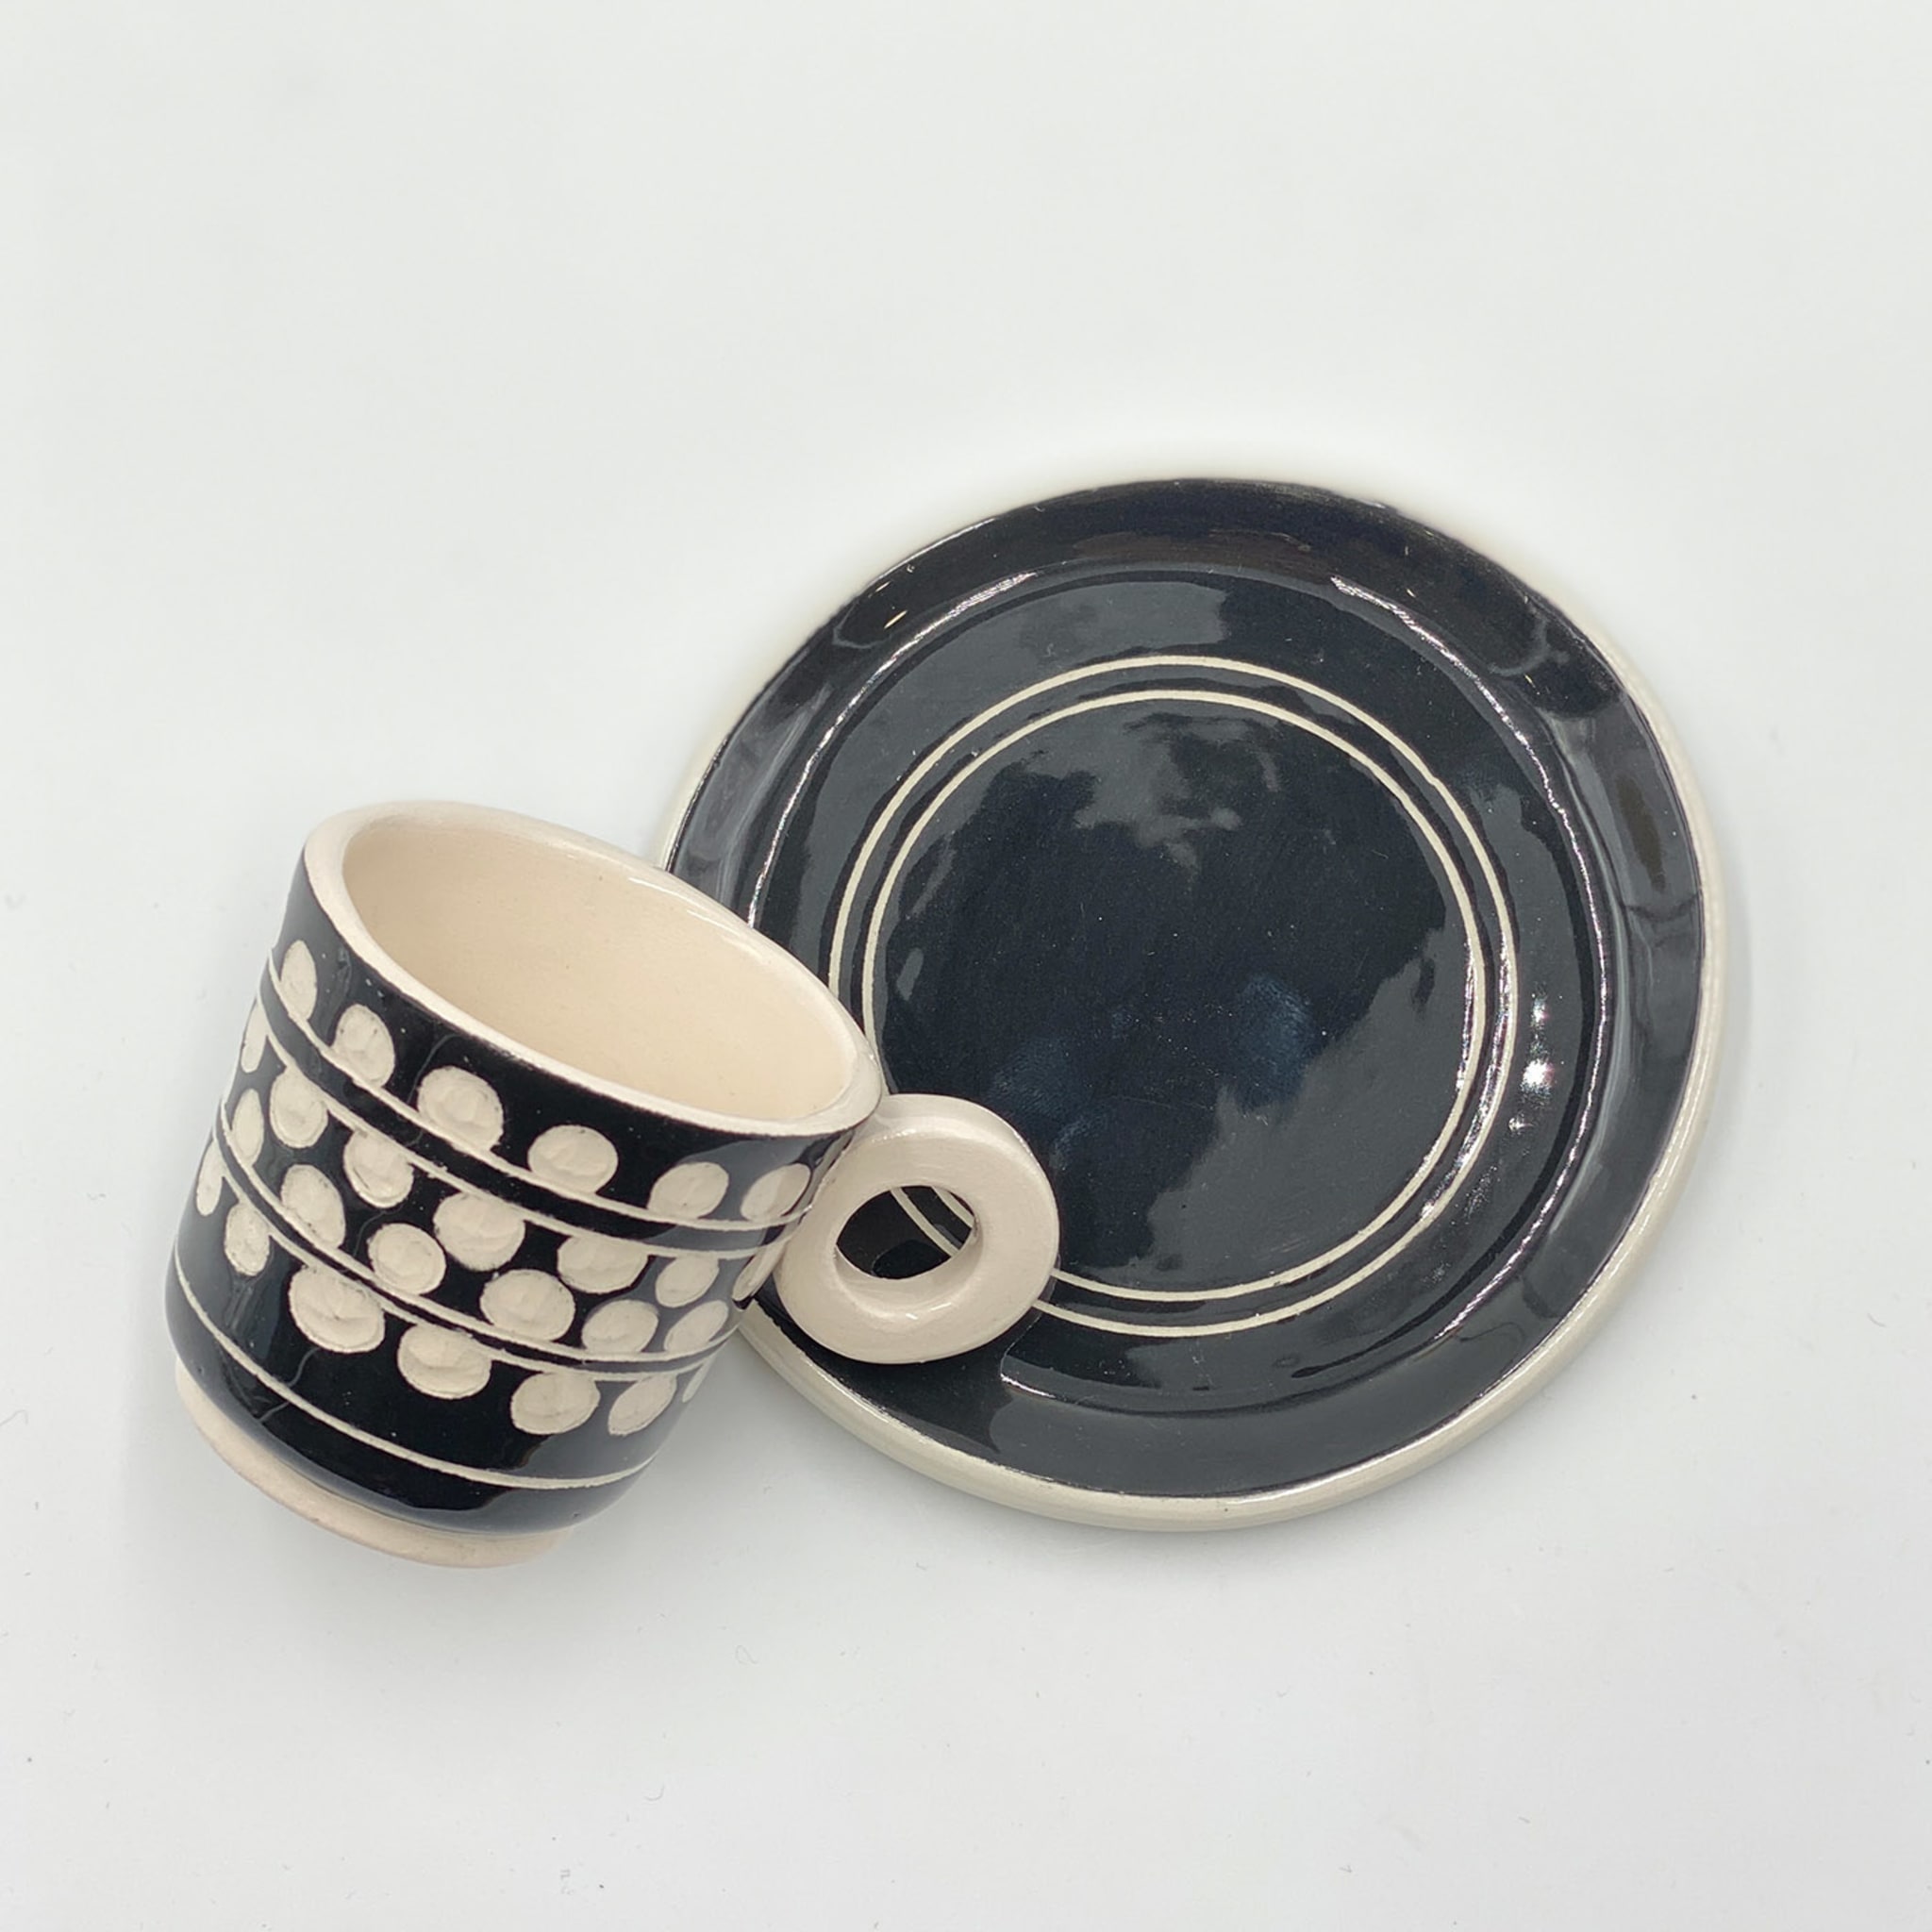 Bouclé Set of 2 Black-And-White Espresso Cups with Saucers - Alternative view 1